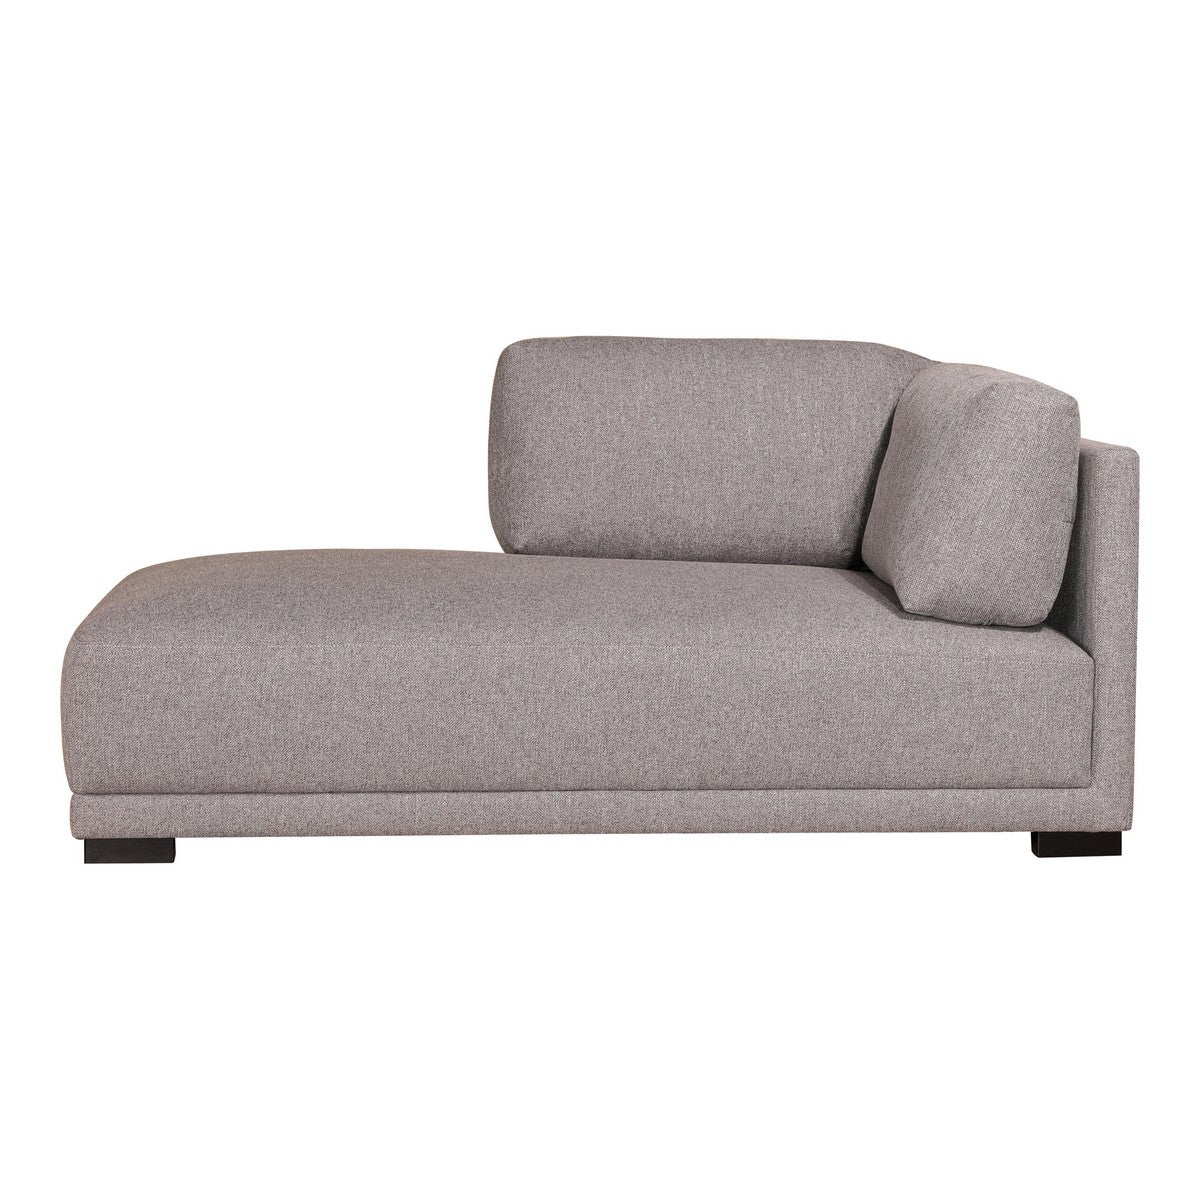 Moe's Home Collection Romeo Chaise Left Grey - RN-1117-29 - Moe's Home Collection - chaise lounges - Minimal And Modern - 1